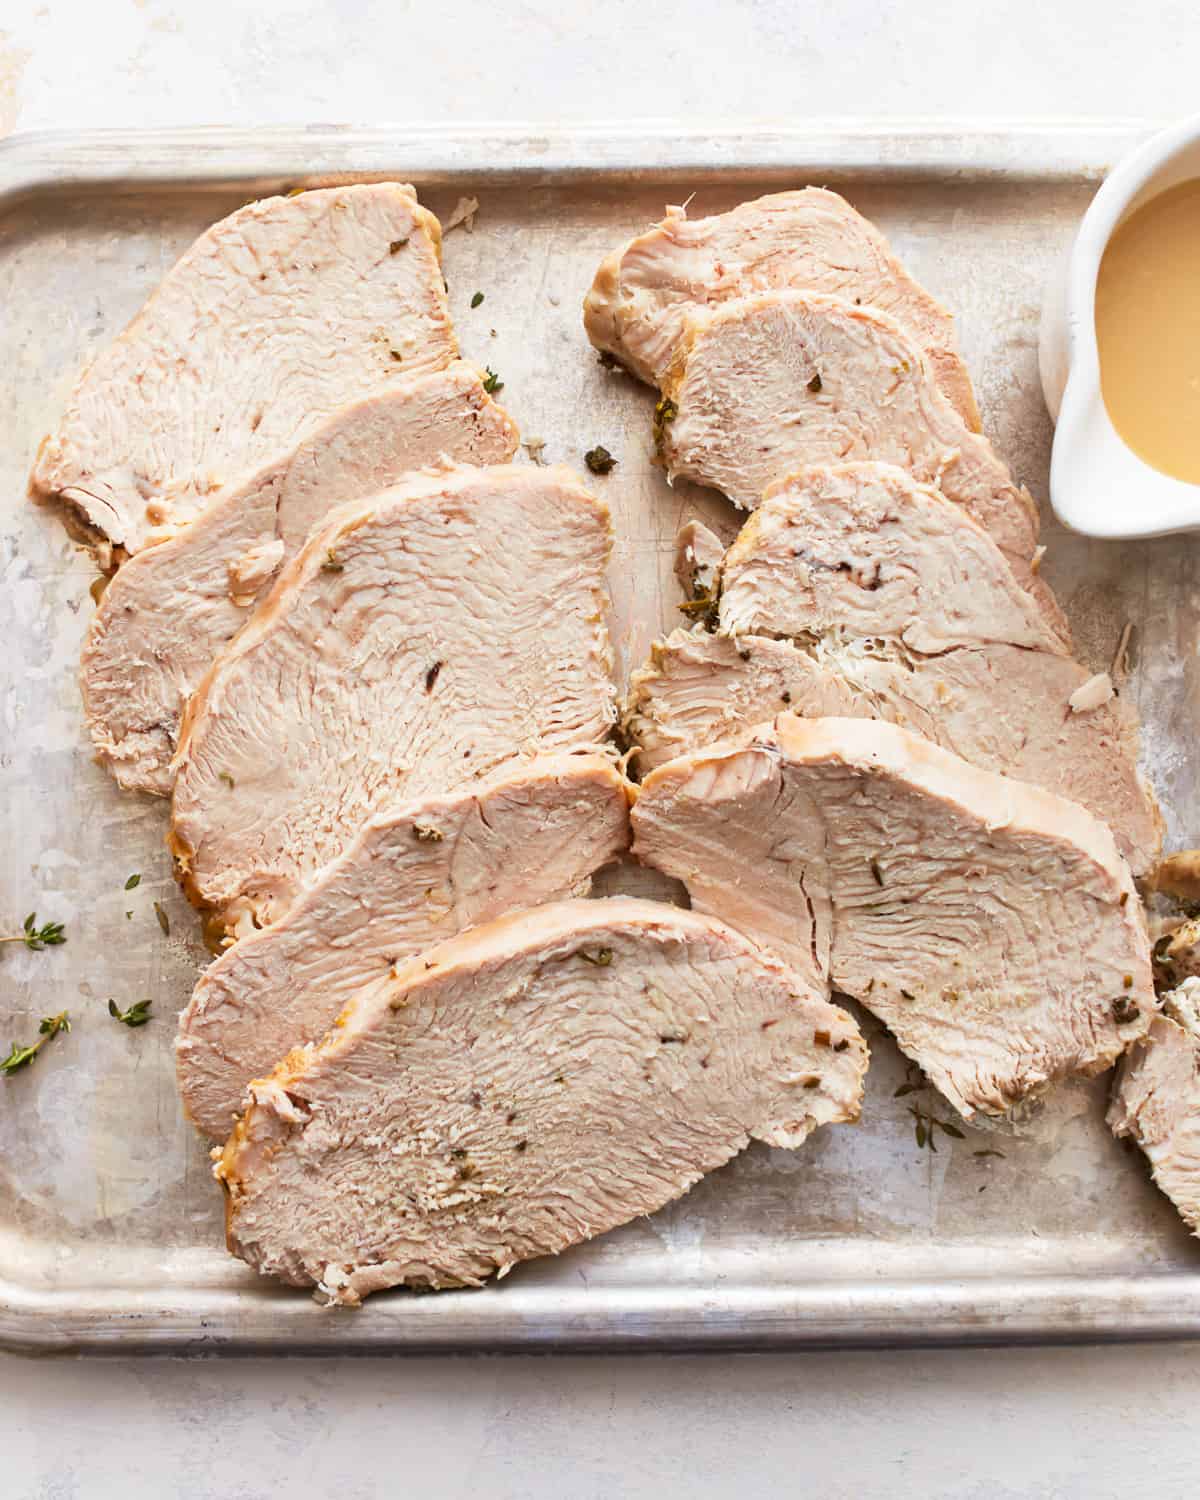 Slices of pressure cooker turkey breast on a baking sheet with a dish full of turkey gravy.